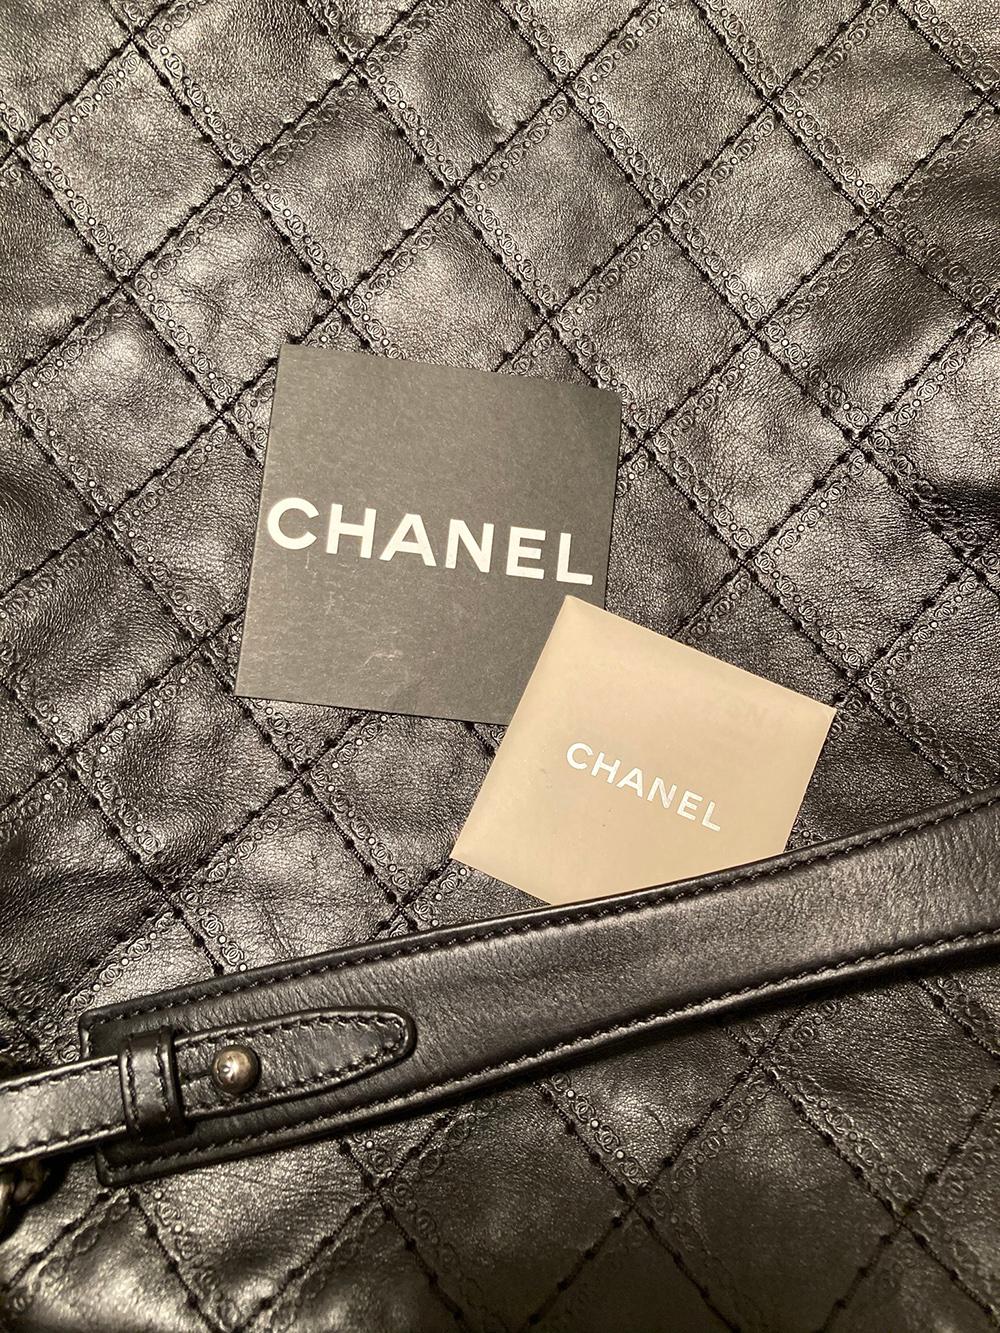 Chanel Black Leather Crave Tote Bag For Sale 2